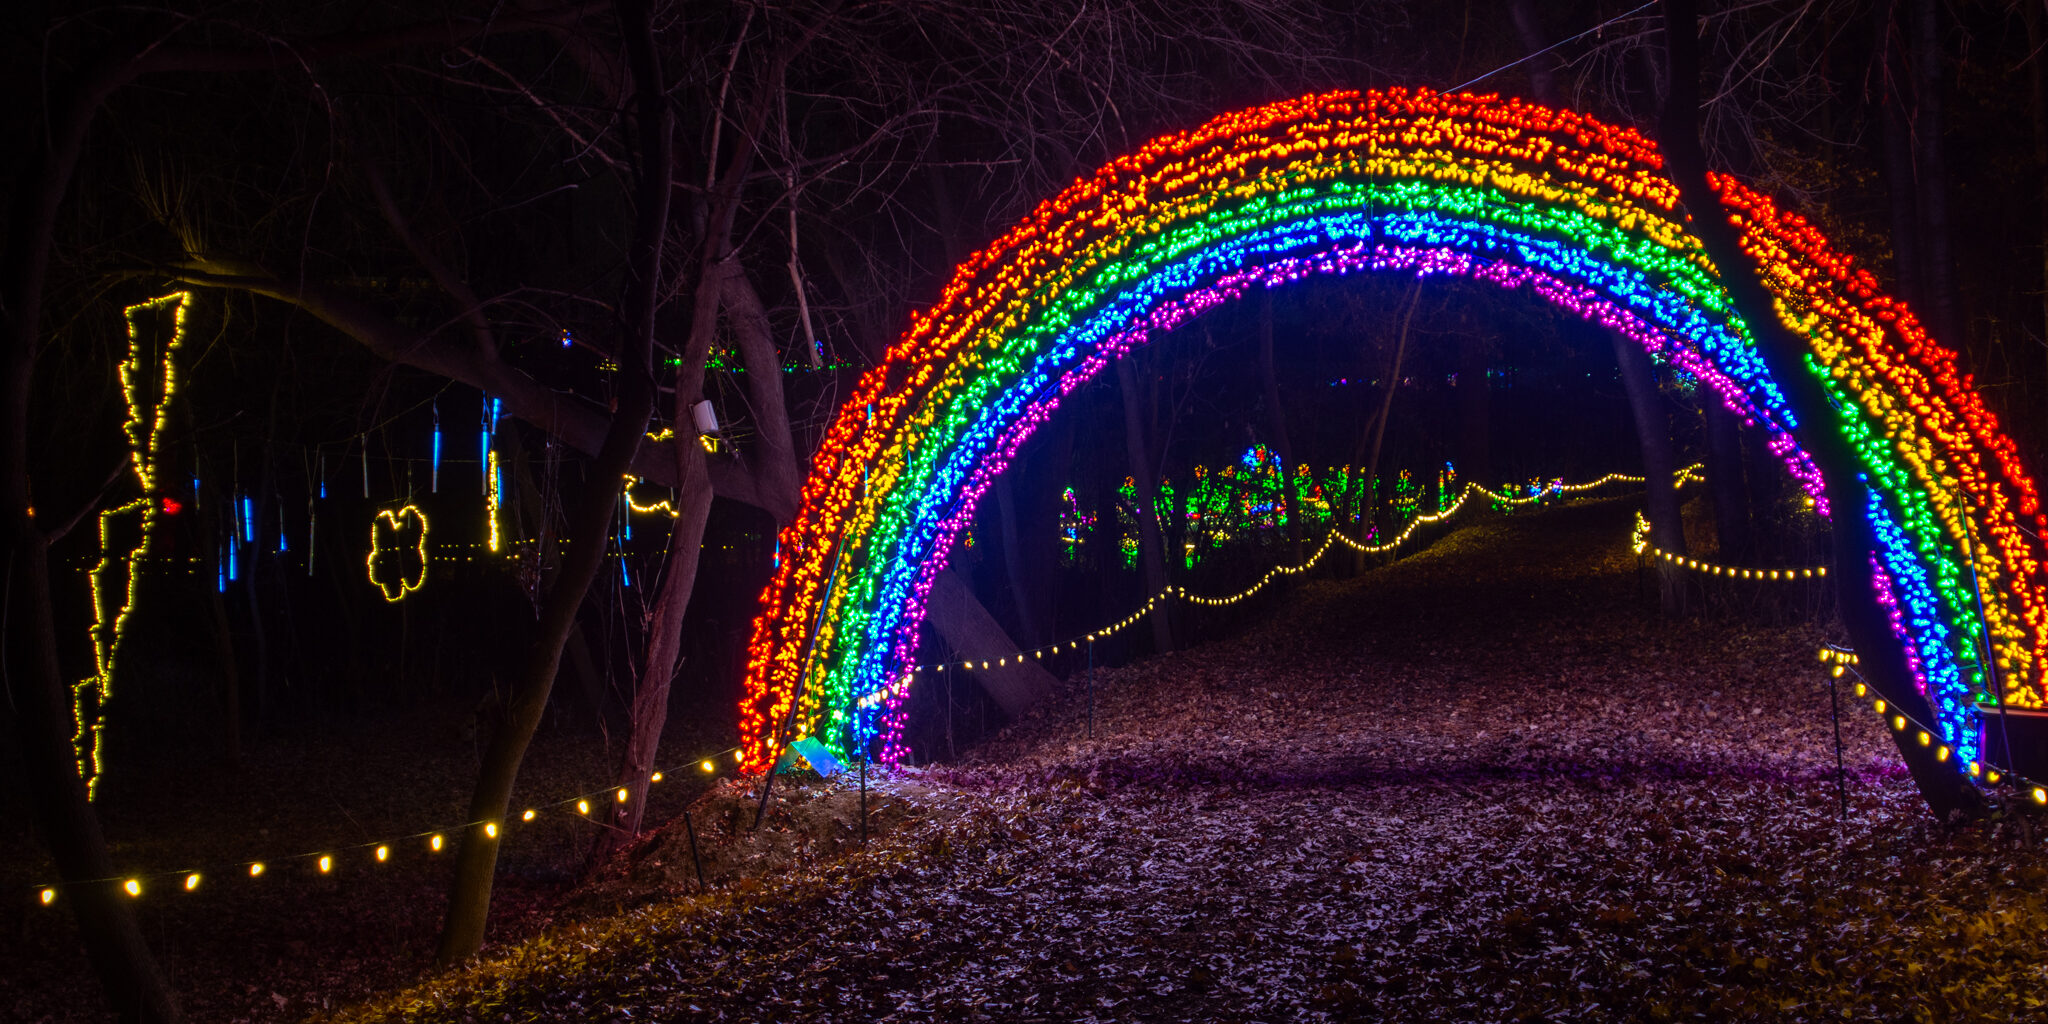 Multi-colored holiday lights arranged in a rainbow arch with a vegetable garden display in the background at night.